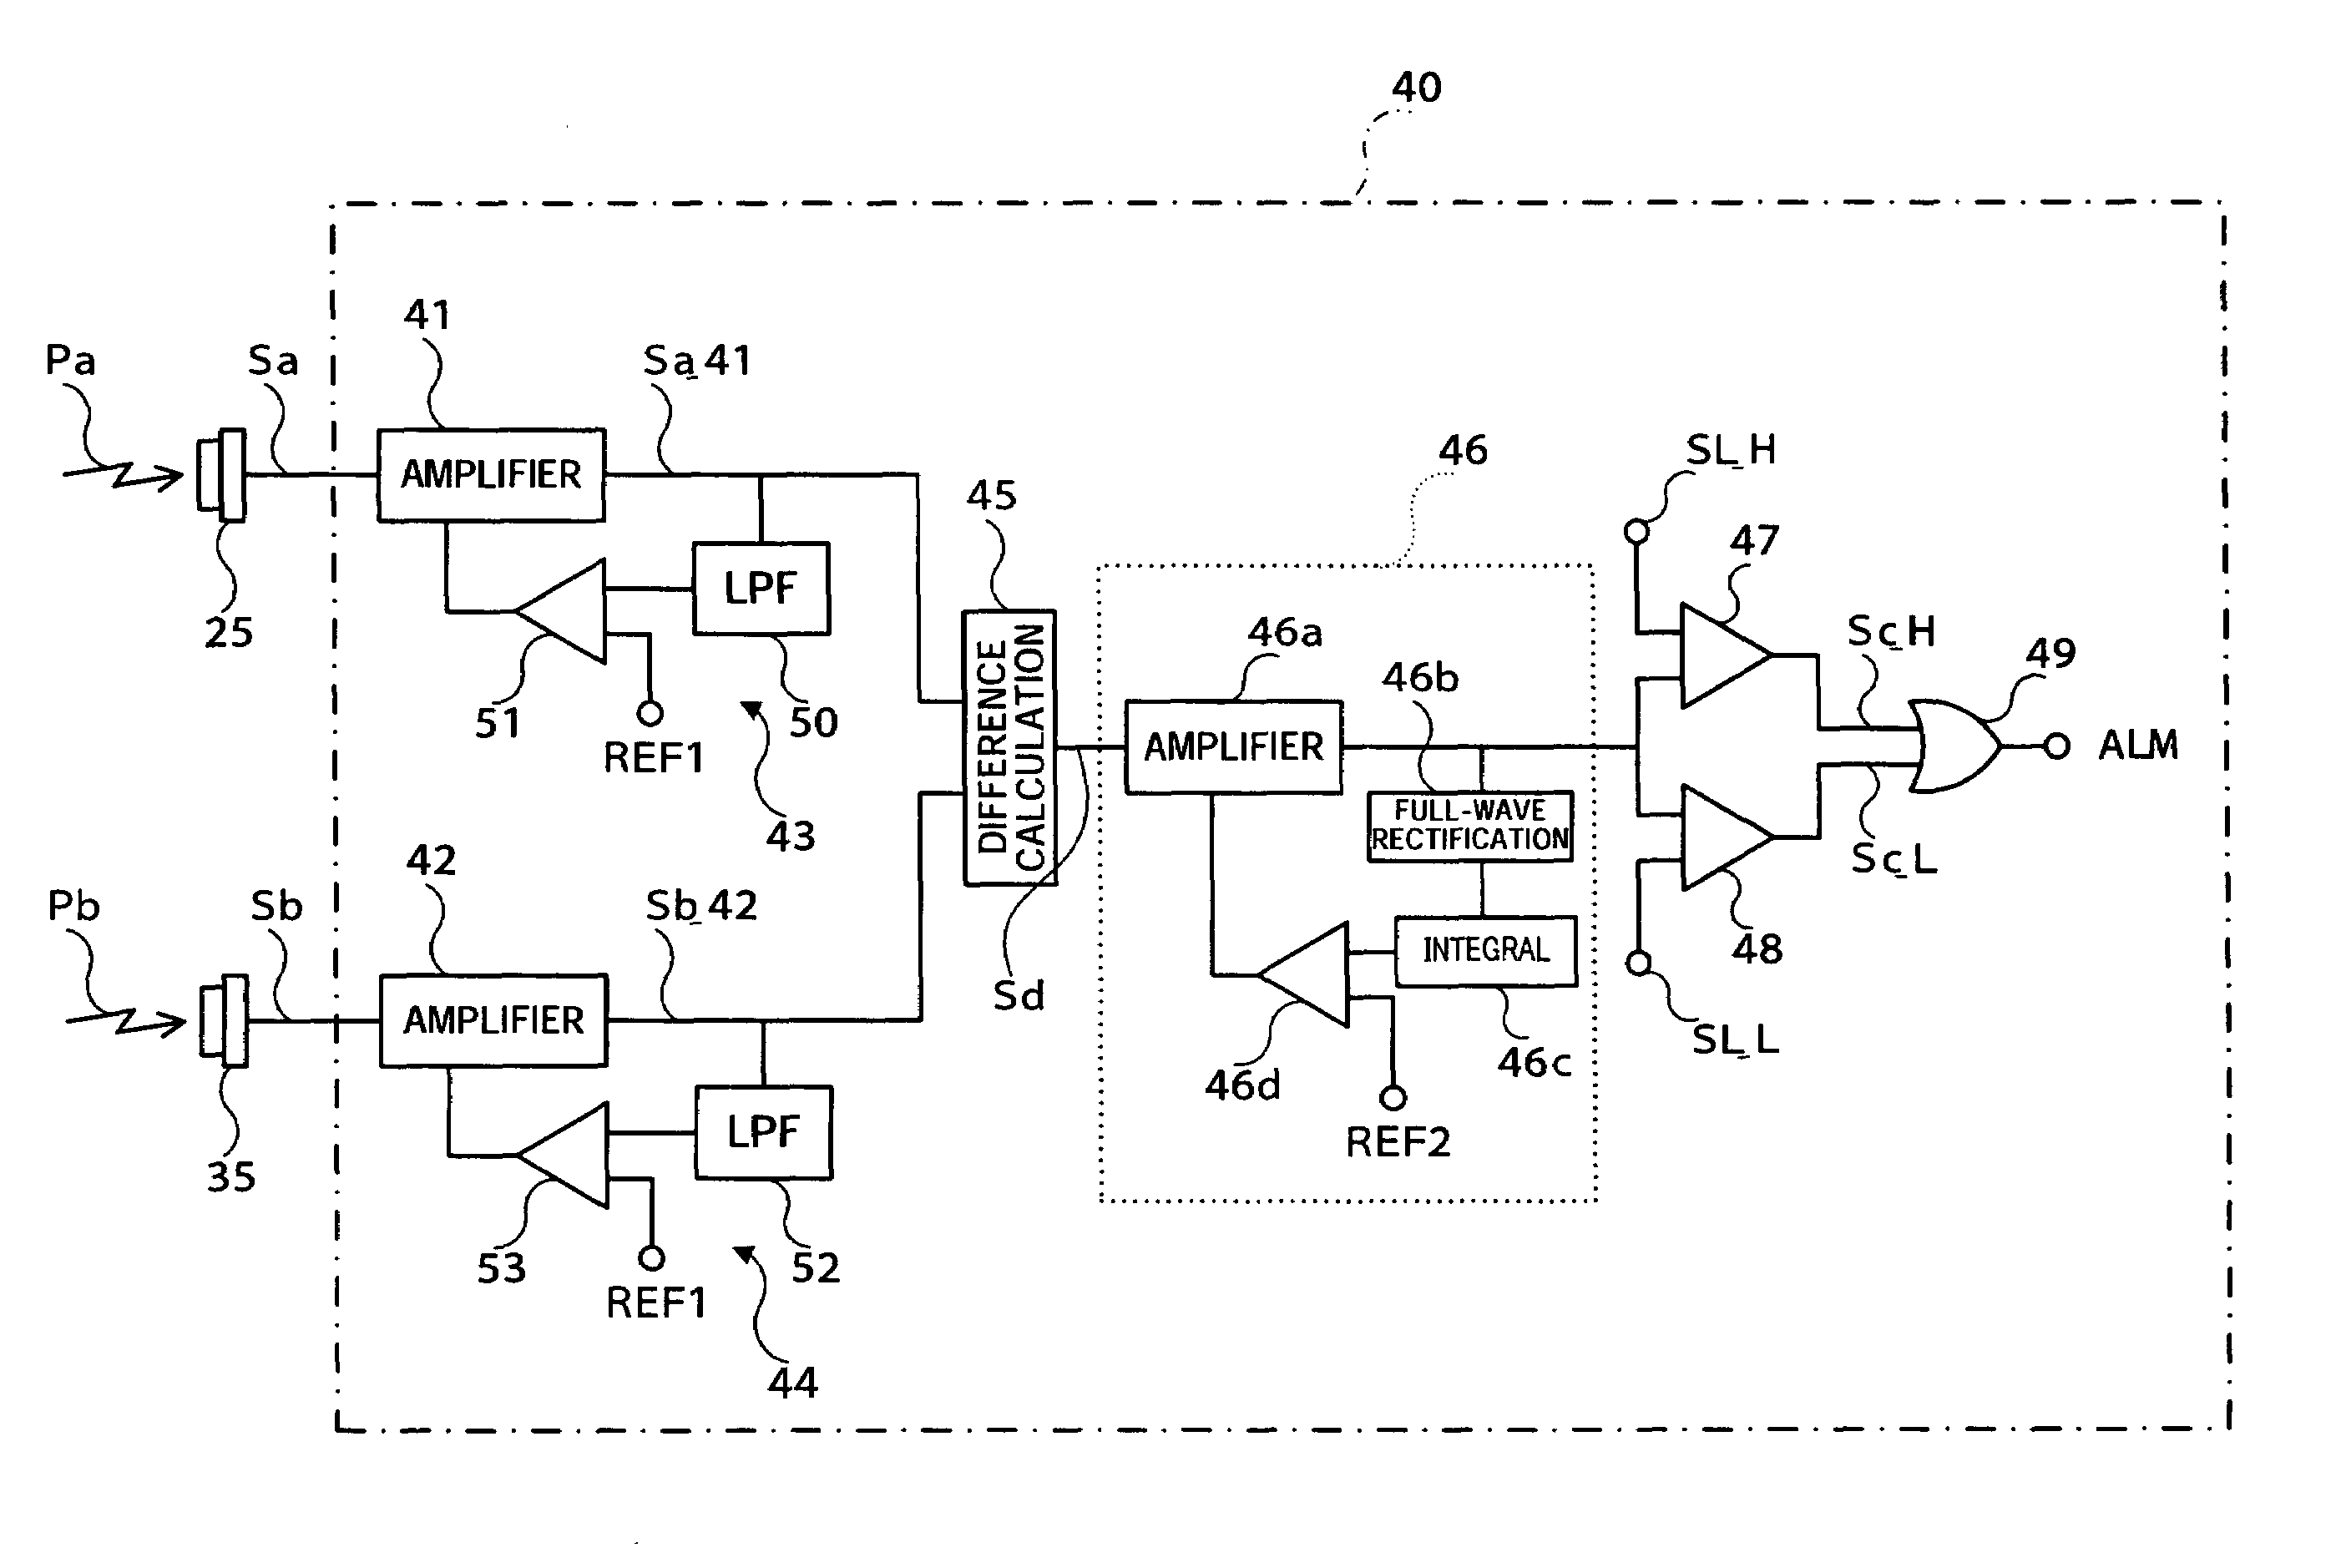 Metal surface inspection device for metal rings of a continuously variable transmission belt